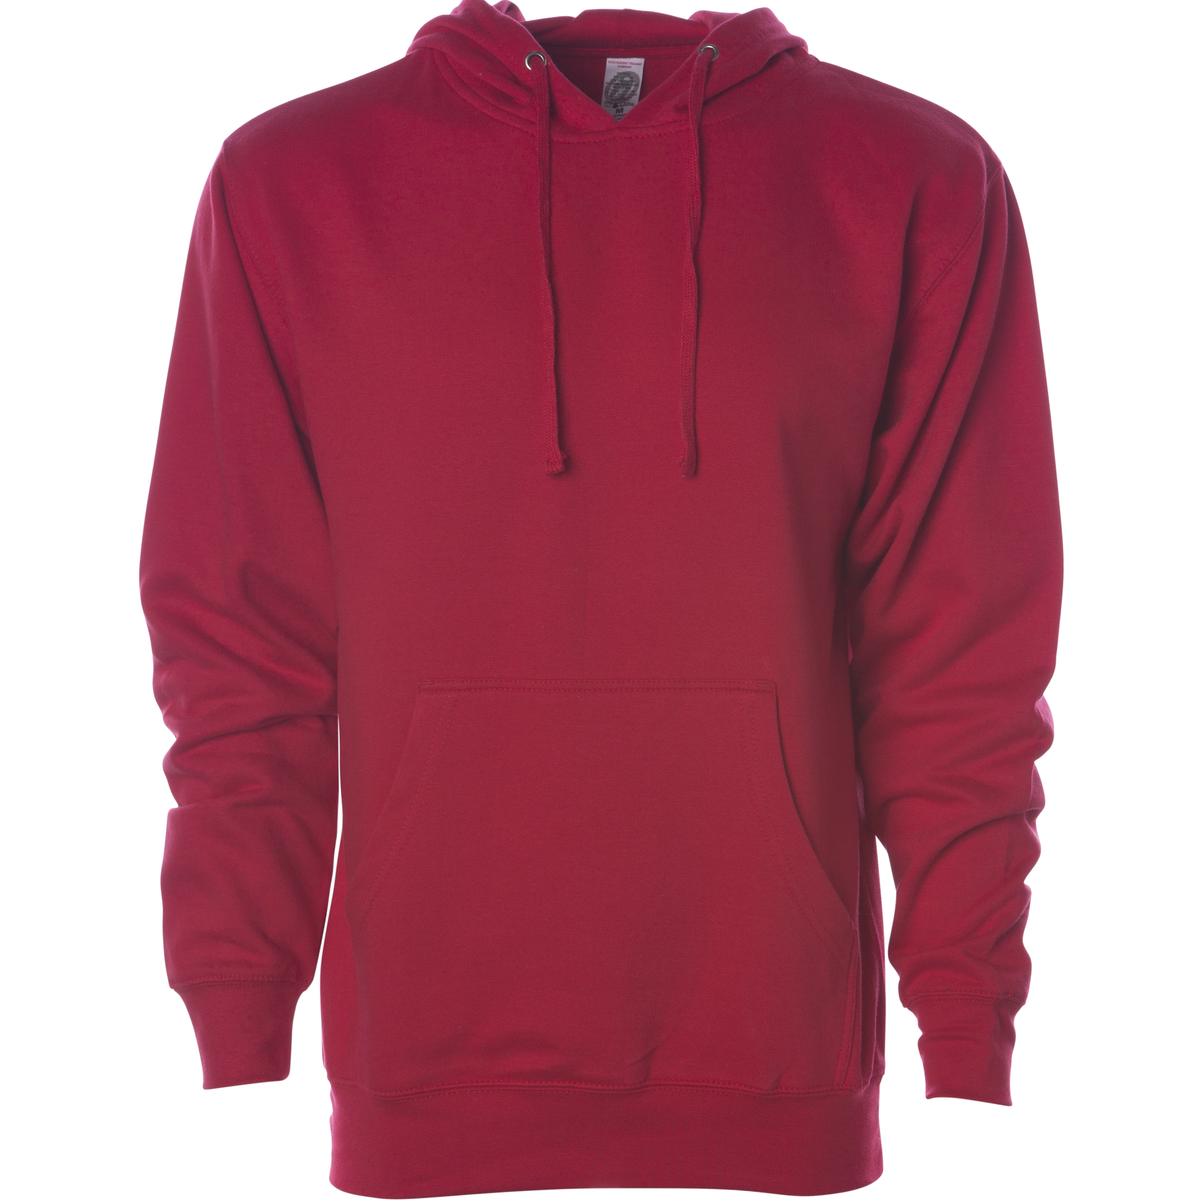 SS4500 #4 - Midweight Hooded Pullover Sweatshirt